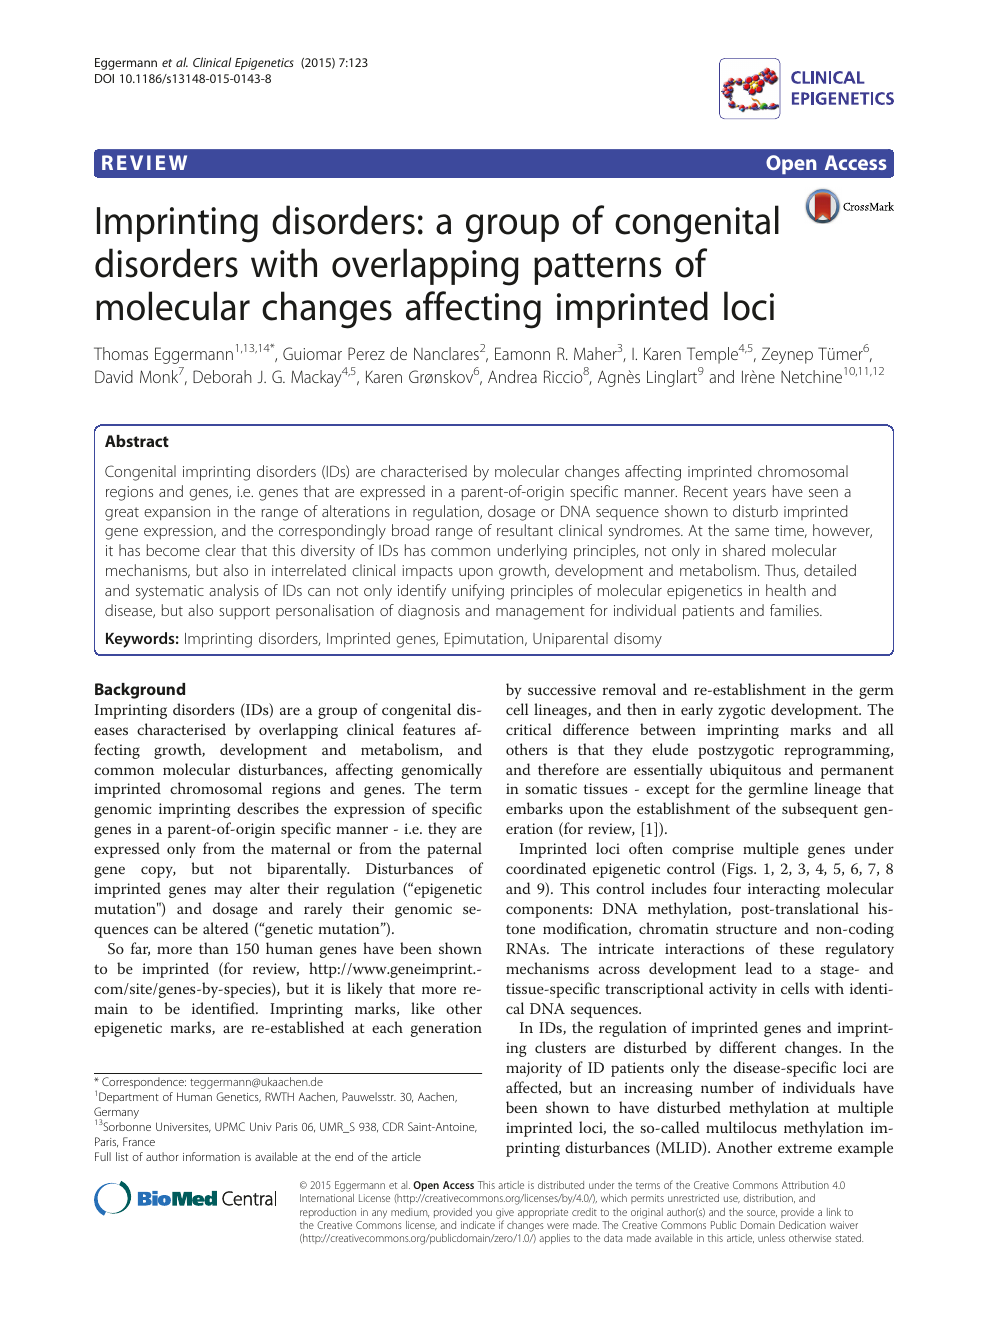 Imprinting Disorders A Group Of Congenital Disorders With Overlapping Patterns Of Molecular Changes Affecting Imprinted Loci Topic Of Research Paper In Clinical Medicine Download Scholarly Article Pdf And Read For Free